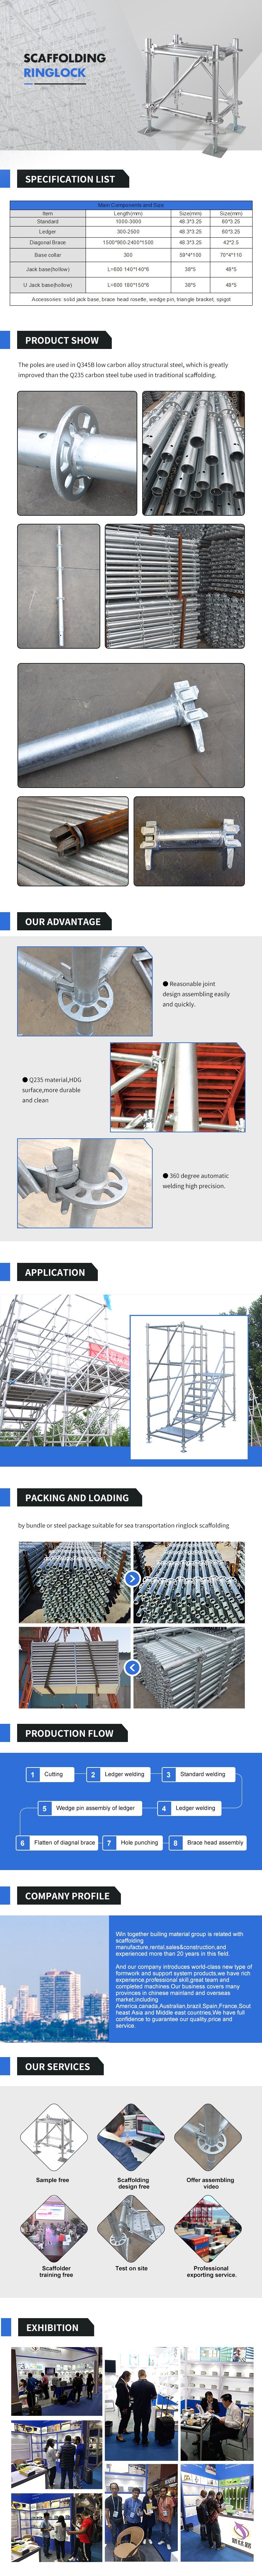 Layher Scaffolding/Ringlock Scaffolding/Construction Scaffolding for Sale